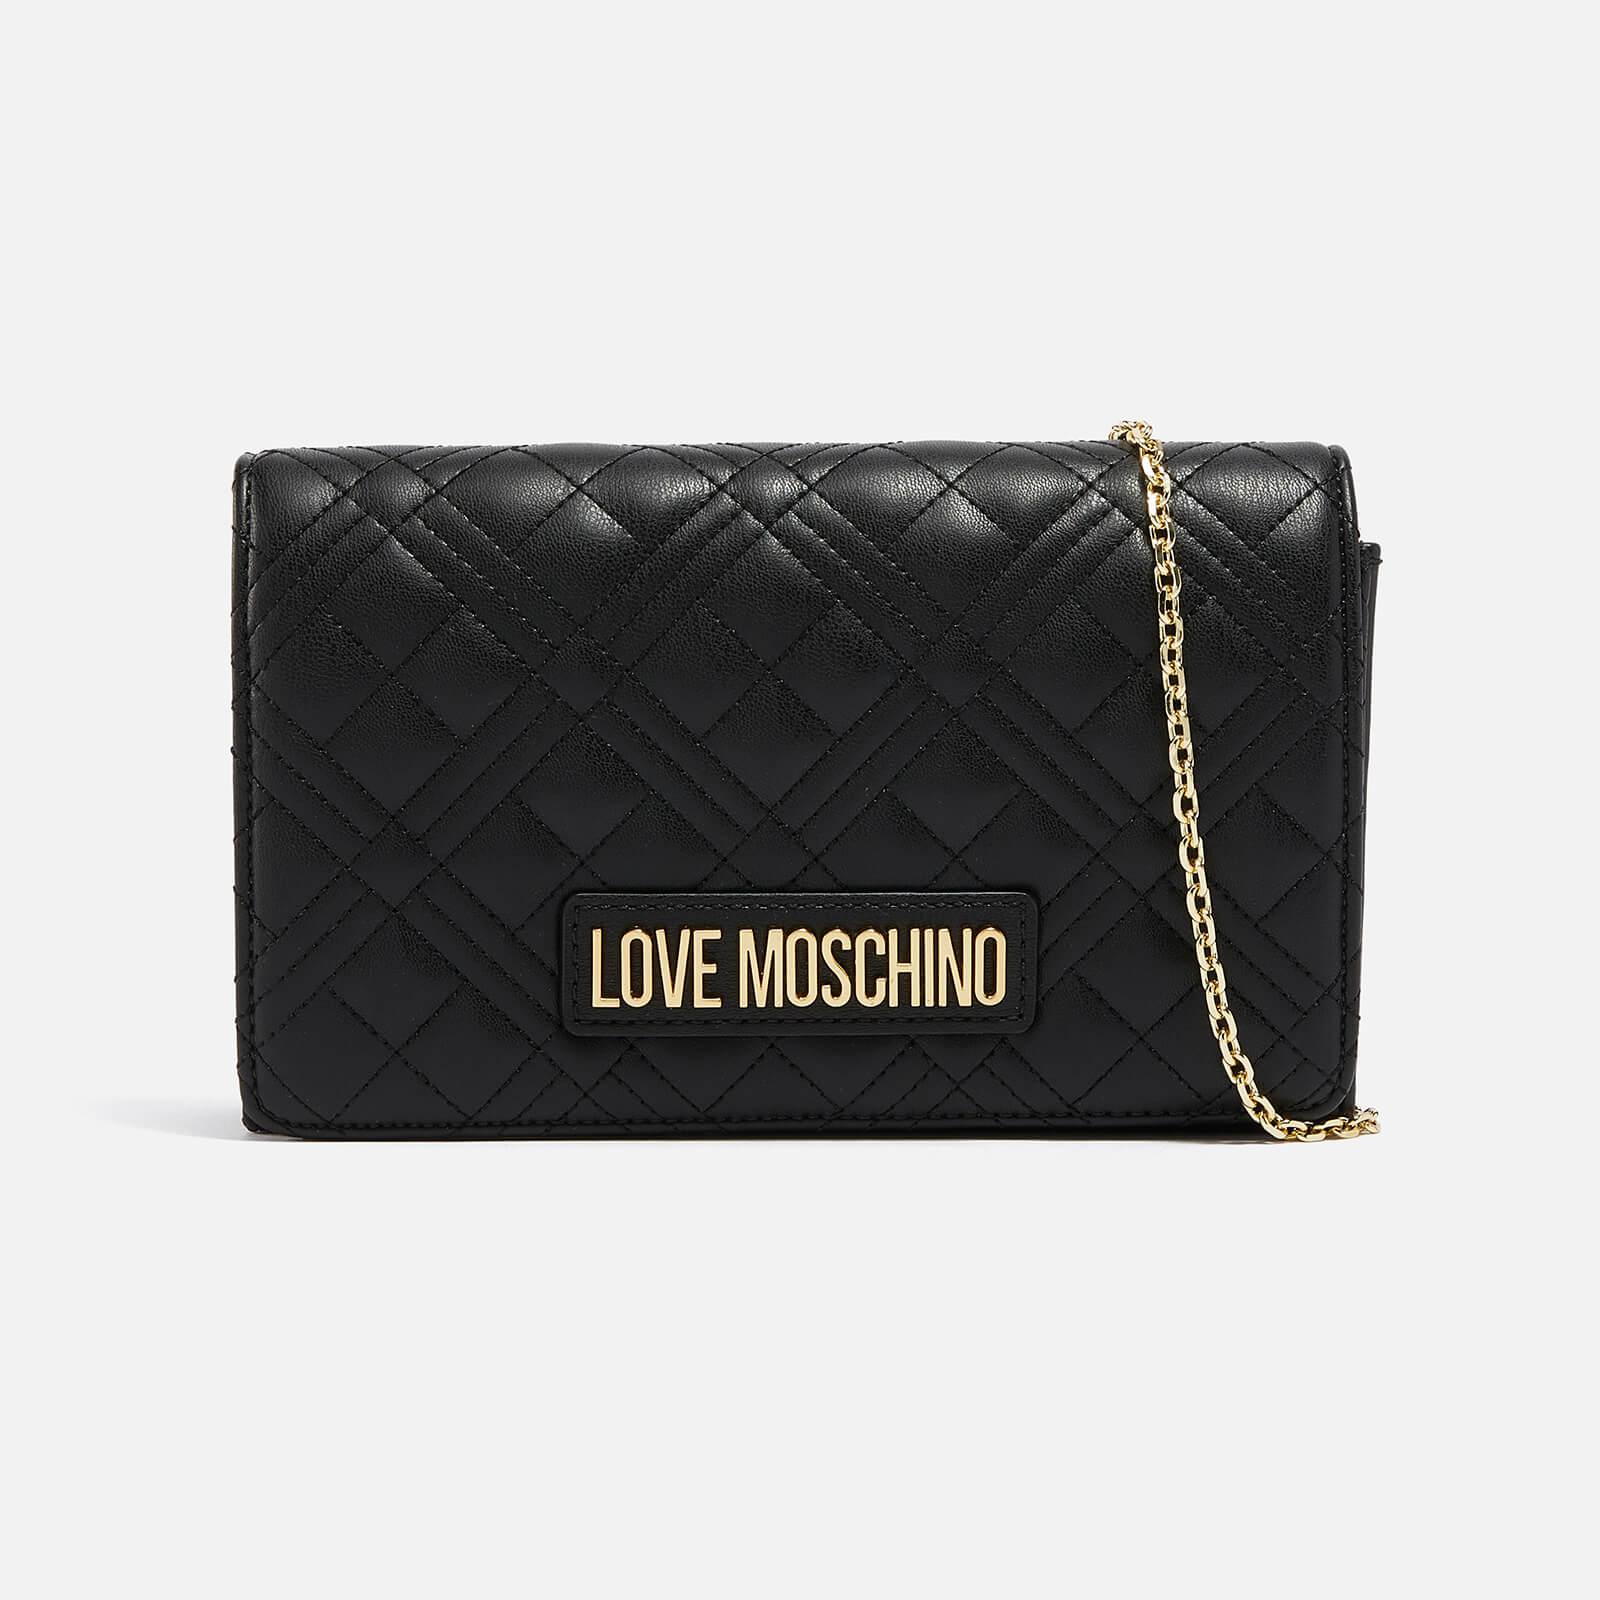 Love Moschino Borsa Quilted Faux Leather Bag in Black | Lyst